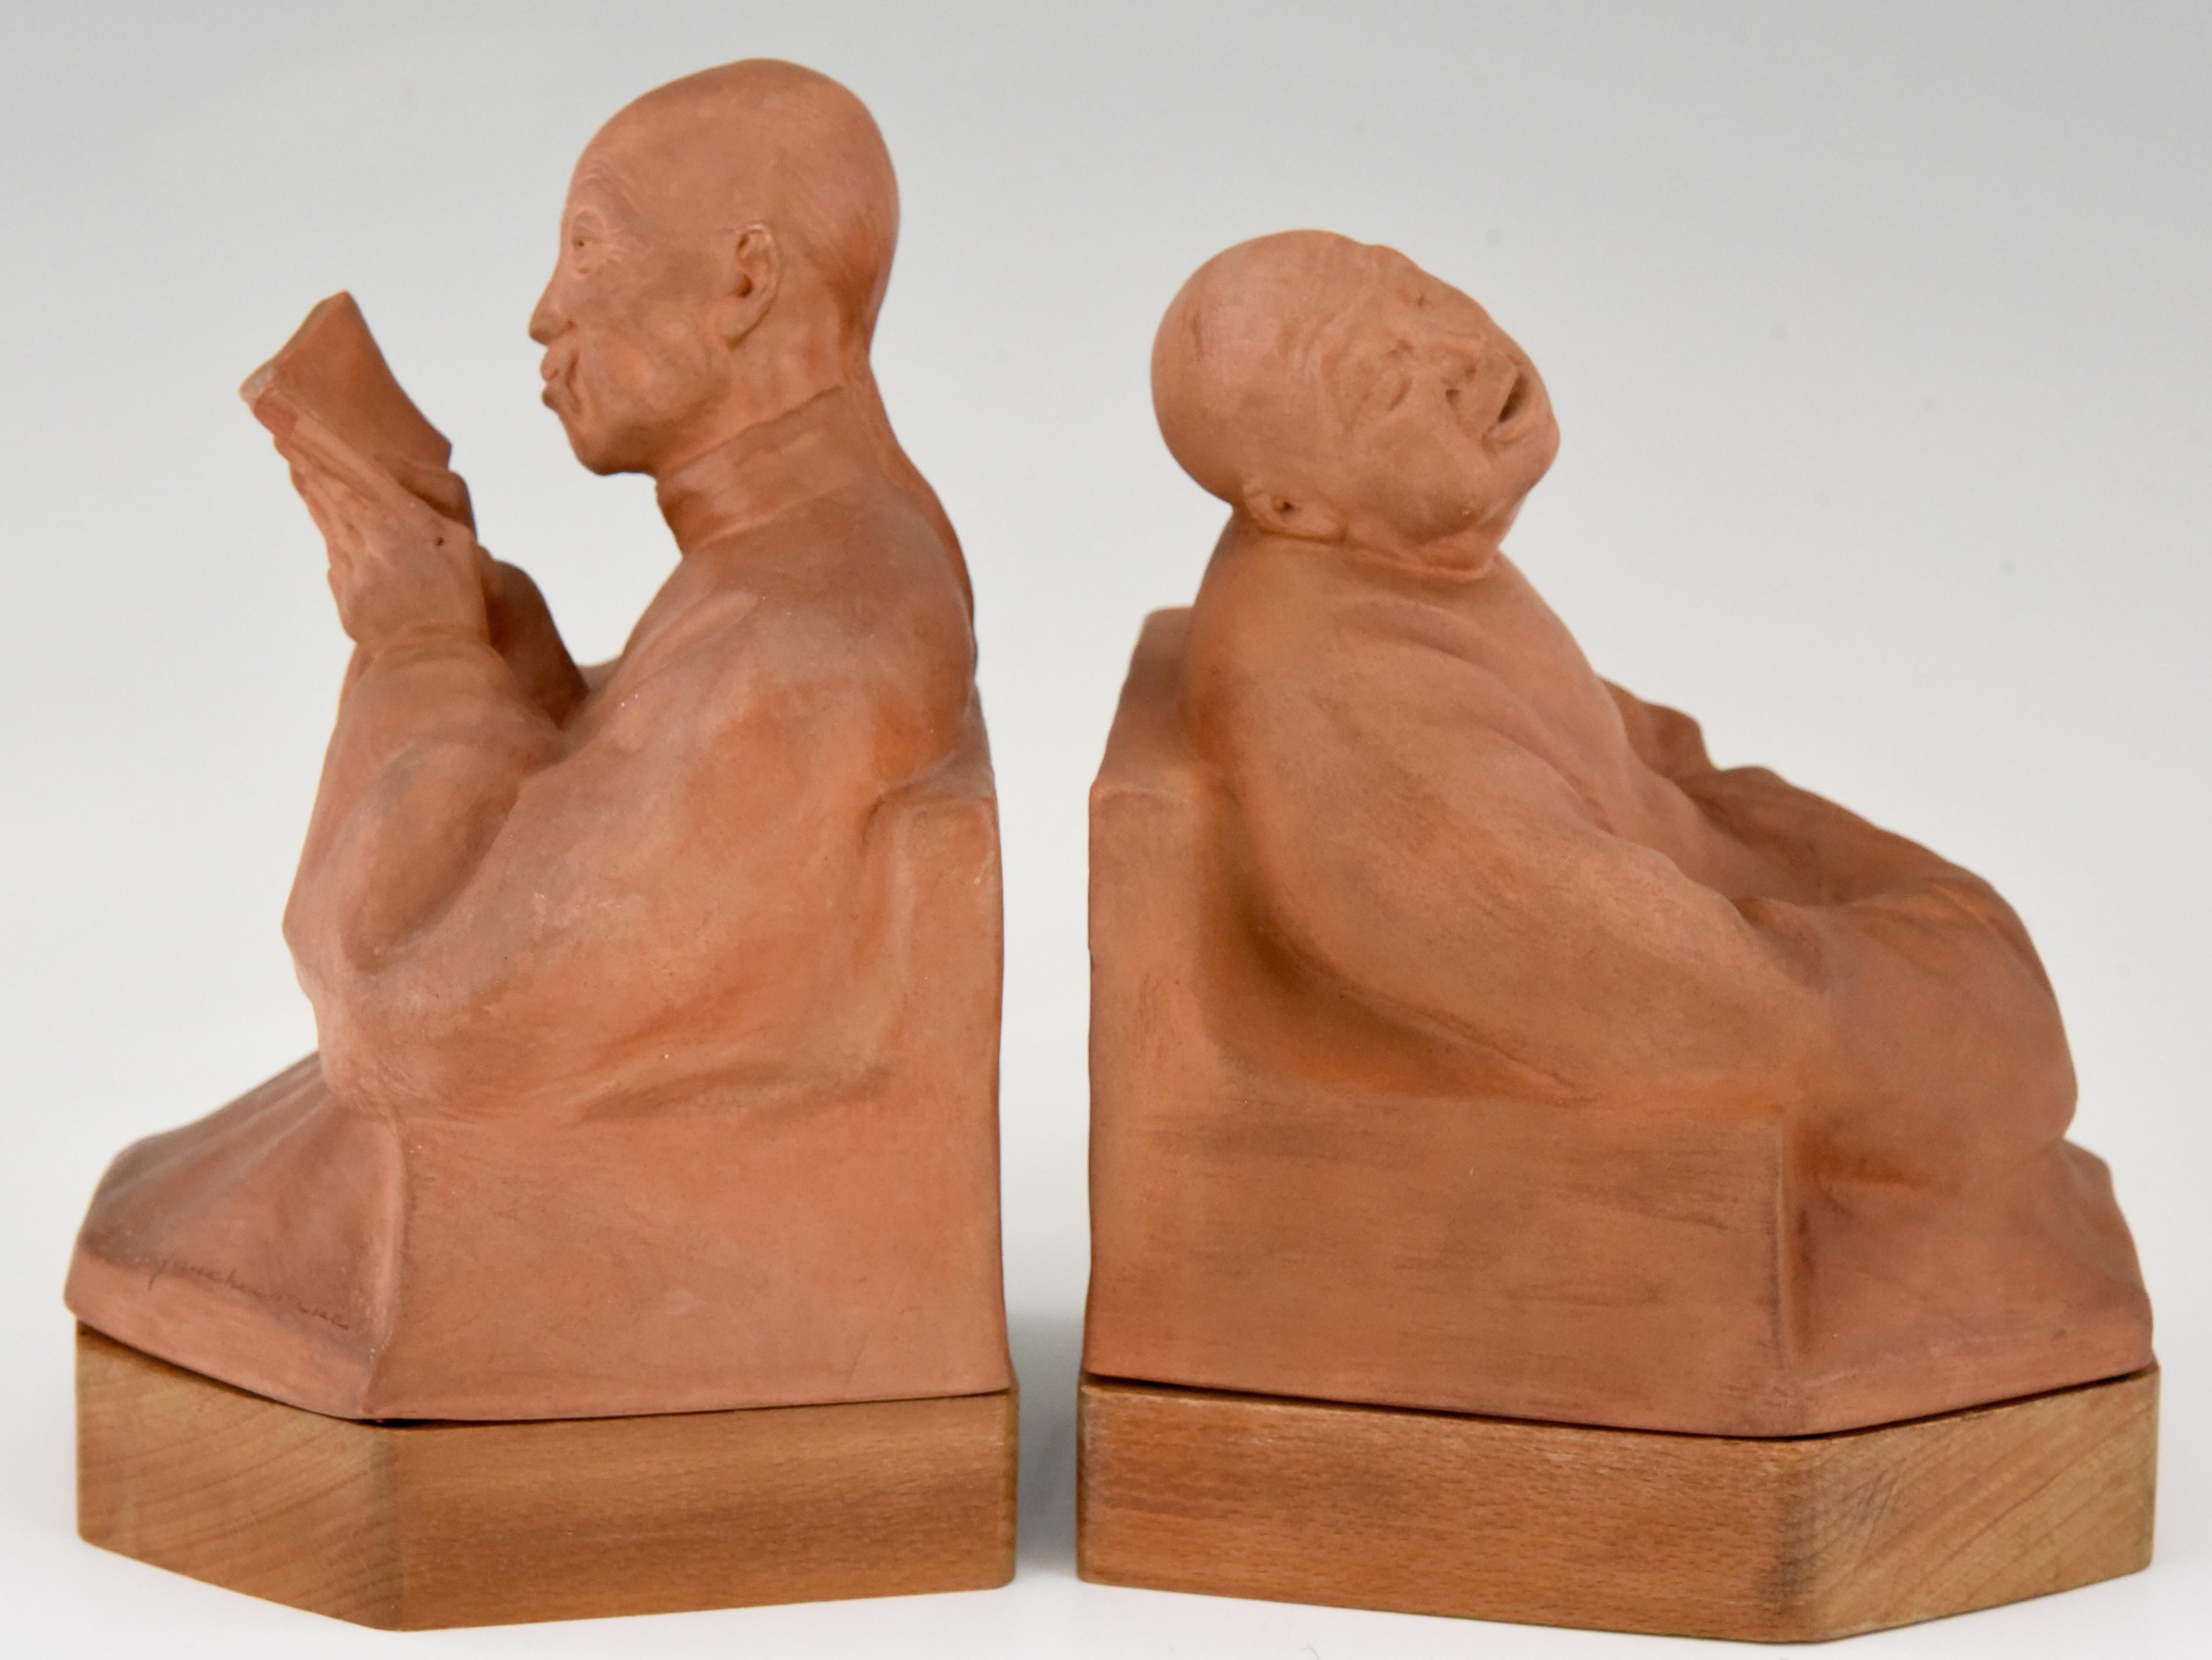 A pair of Art Deco terracotta bookends with Chinese men.
One reading the other listening by Gaston Hauchecorne. The bookends stand on a wooden base. France 1925.
“Dictionnaire des peintres, sculpteurs, dessinateurs et graveurs” ?by E. Benezit.